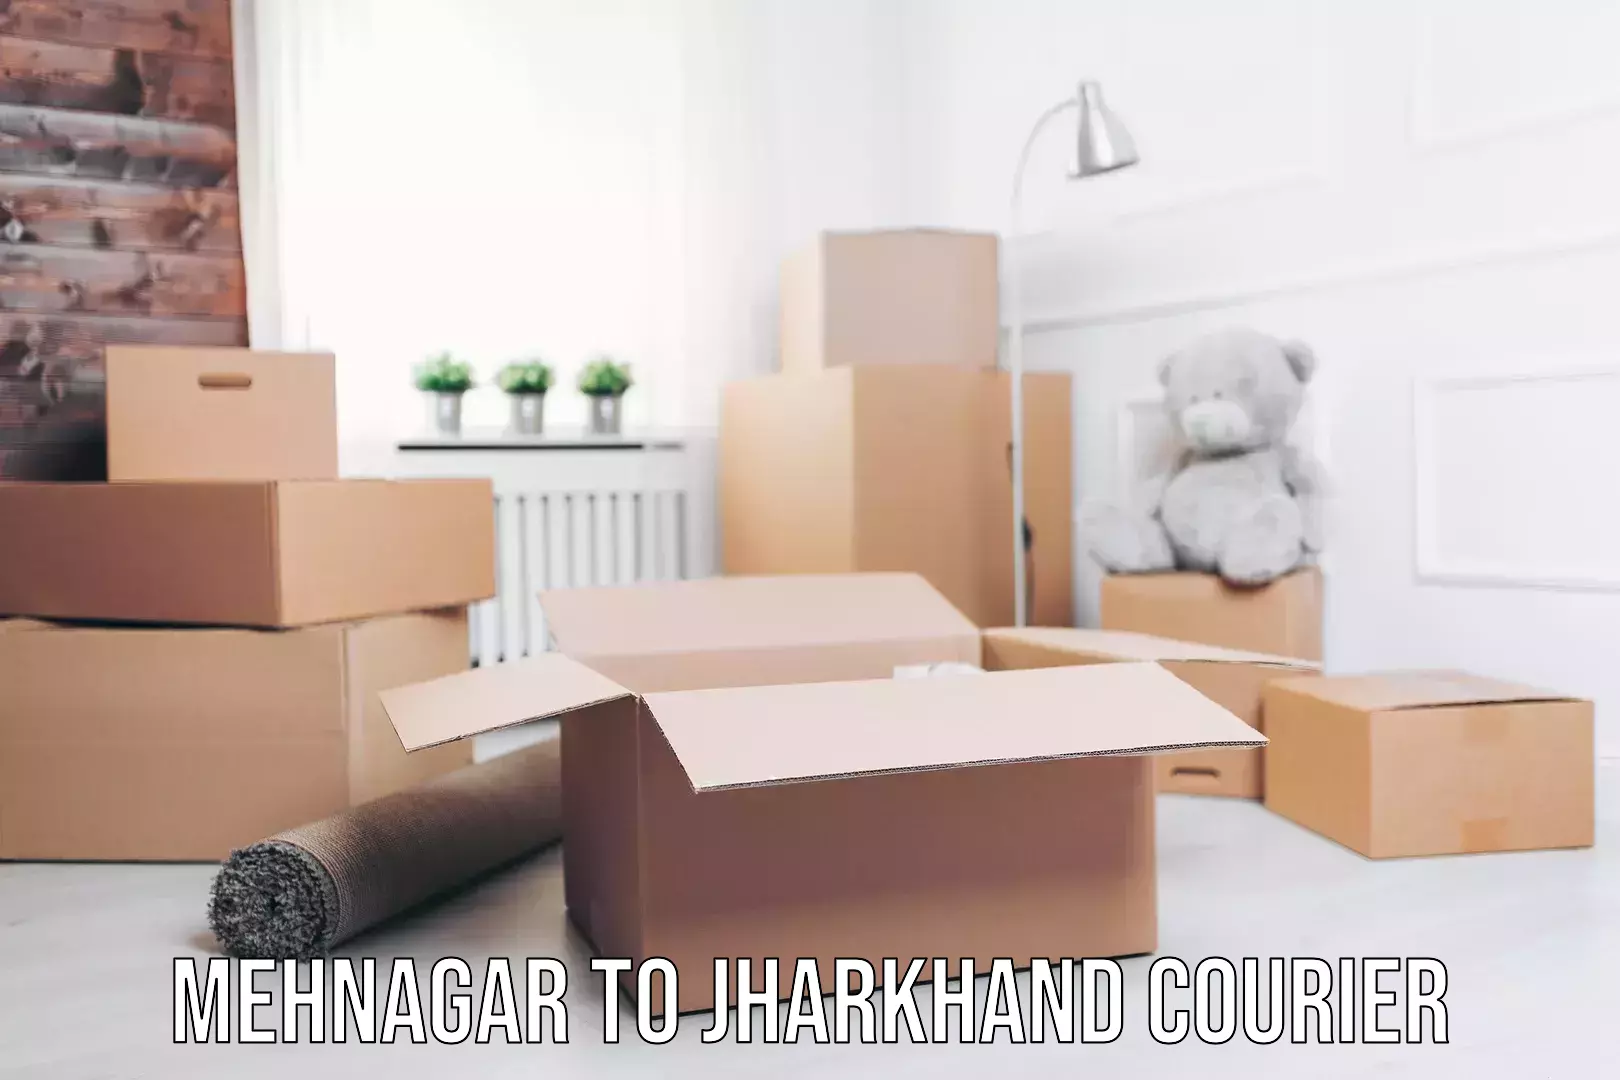 Professional moving company Mehnagar to Jharkhand